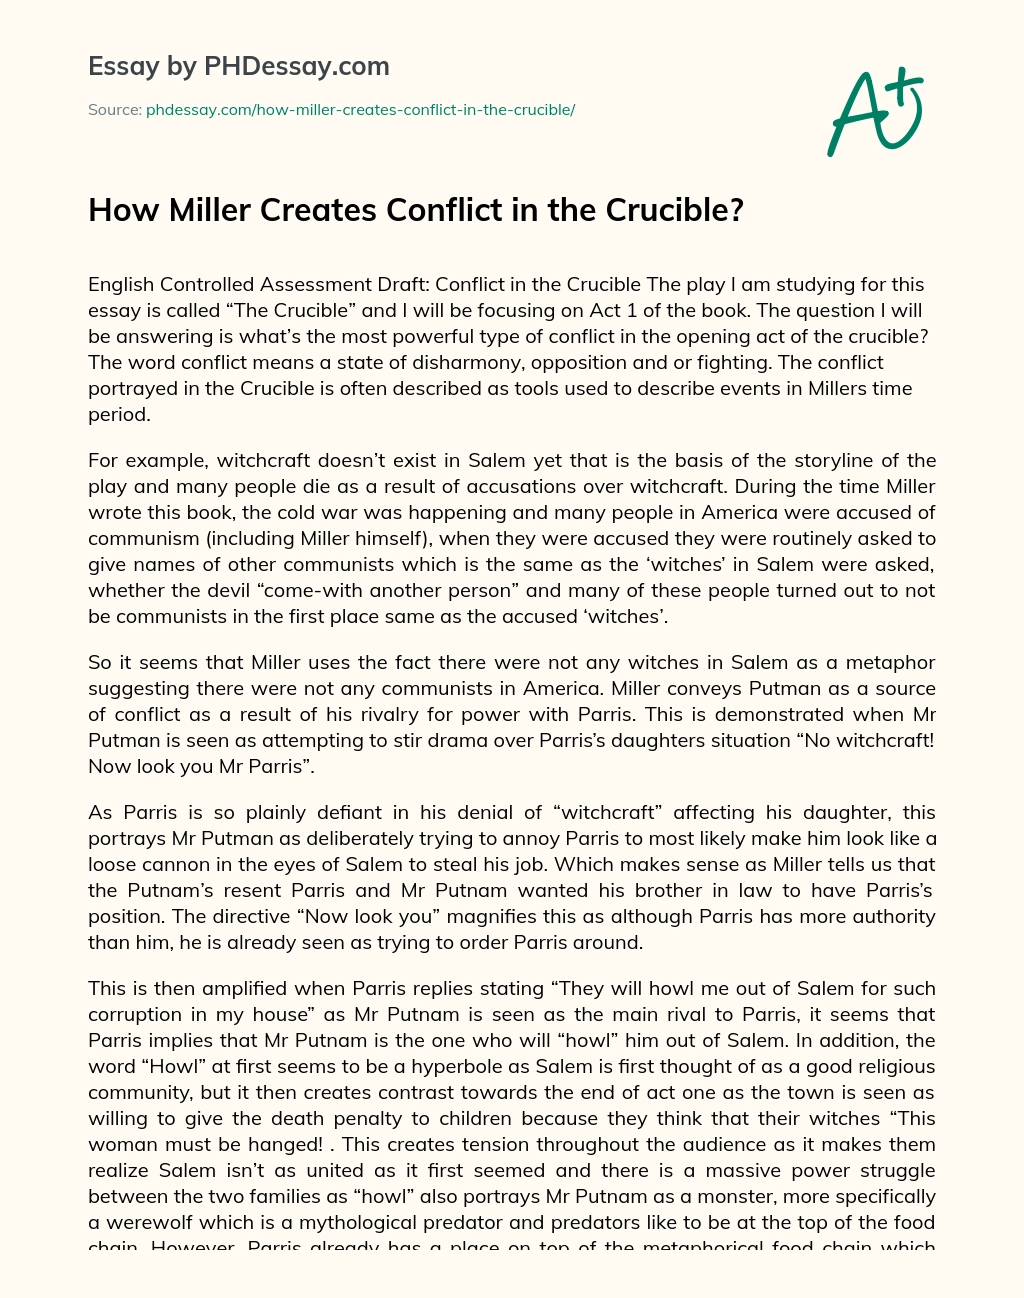 How Miller Creates Conflict in the Crucible? essay